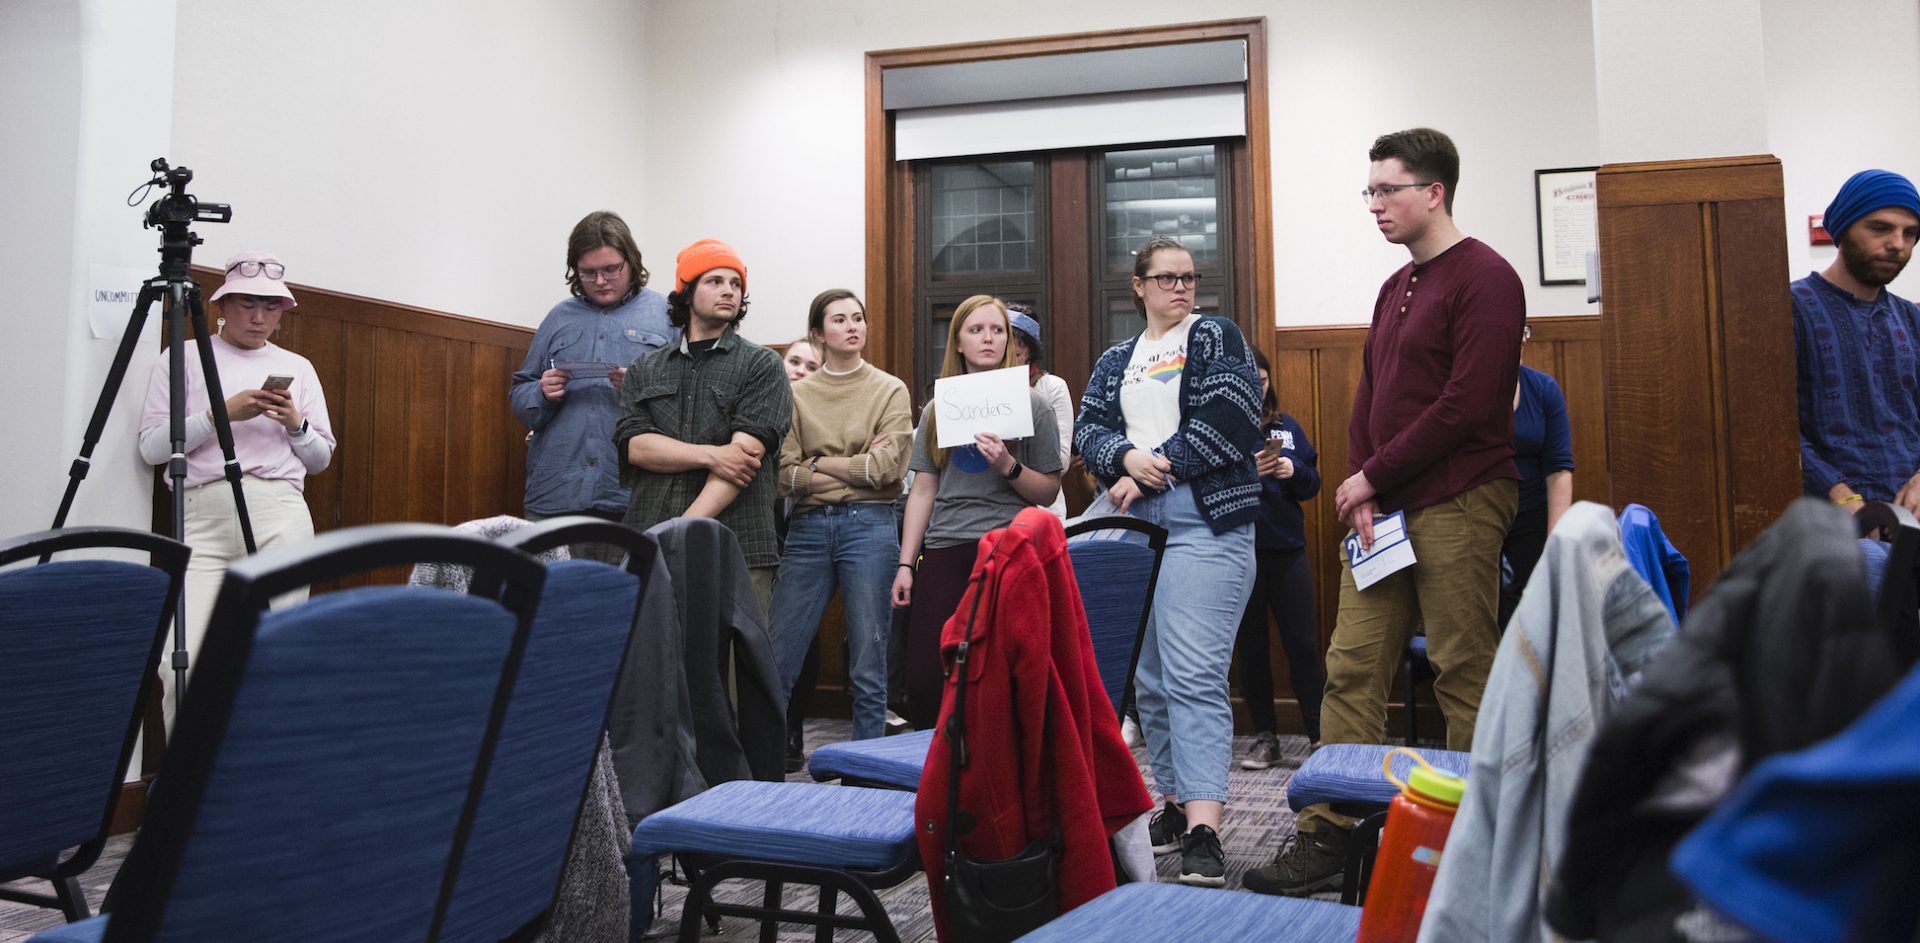 Samuel Pederson (left in center group) stands with the four caucus participants voting for Bernie Sanders at the Univerity of Pennsylvania sattelite Iowa caucus on February 3, 2020. Pederson originally intended to vote for Andrew Yang, but was swayed to vote Sanders. Sanders was awarded two of the four delegate votes from the group, with the remaining two going to Warren and Buttigieg.